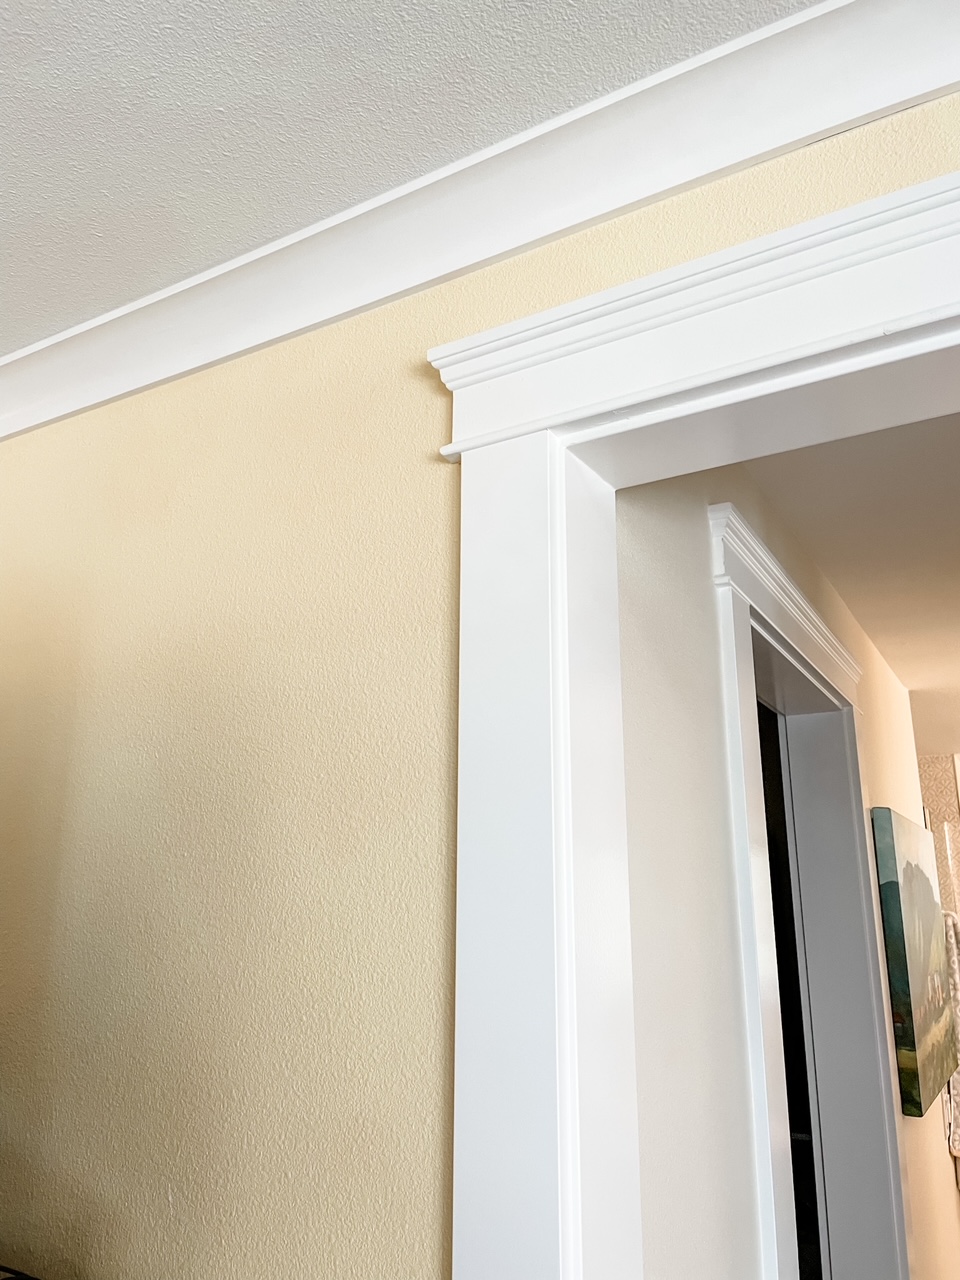 A close up of the crown molding